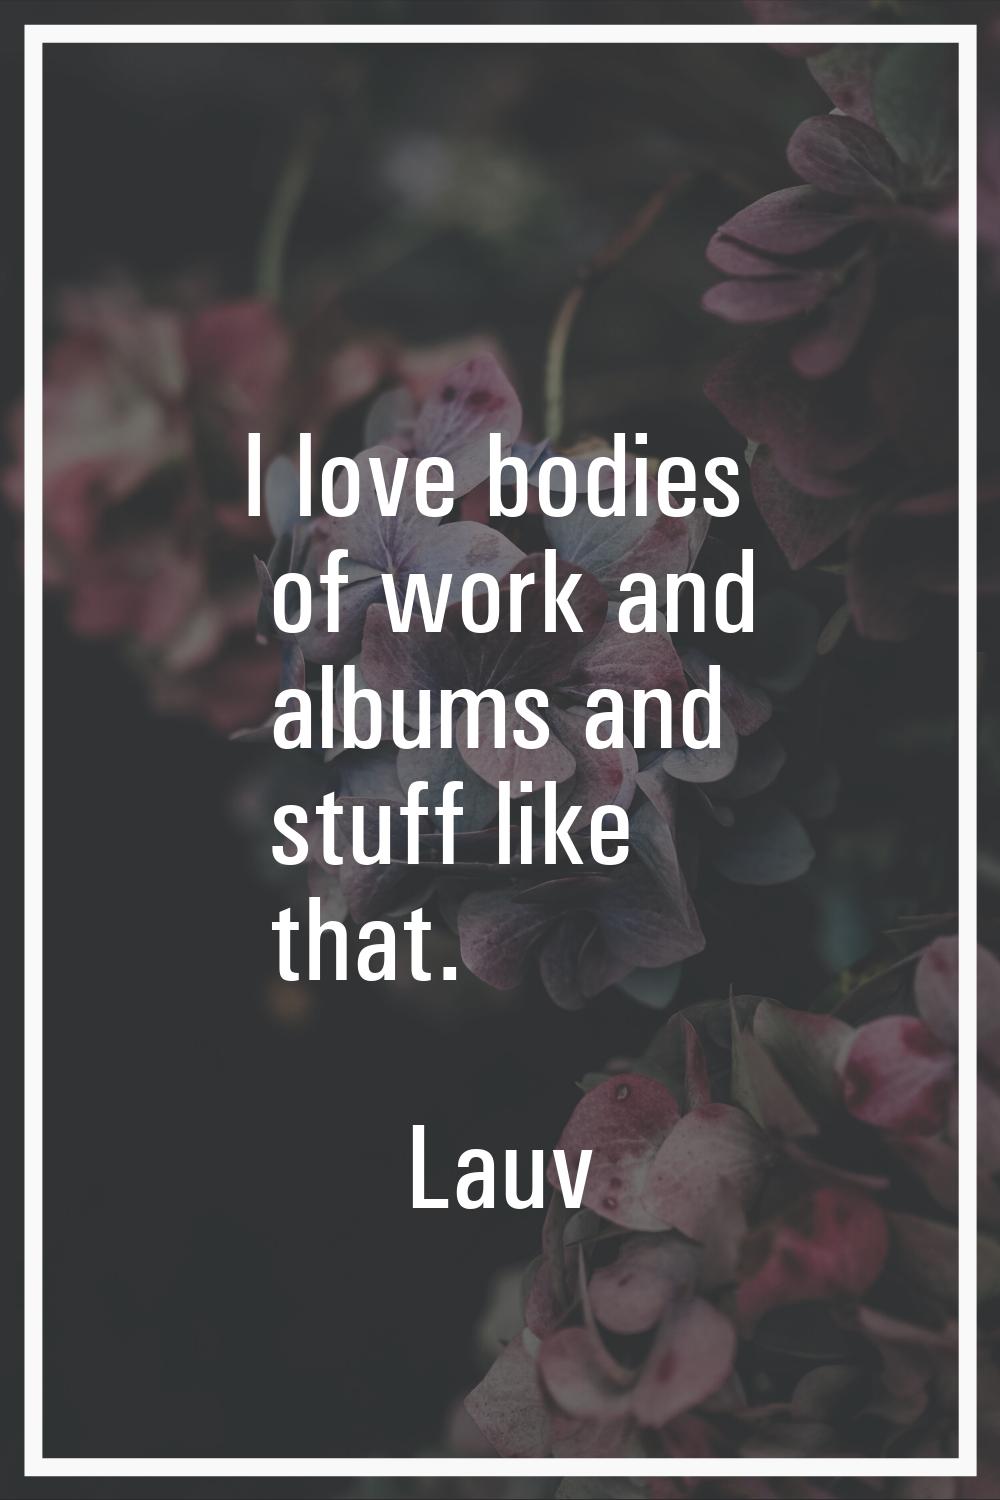 I love bodies of work and albums and stuff like that.